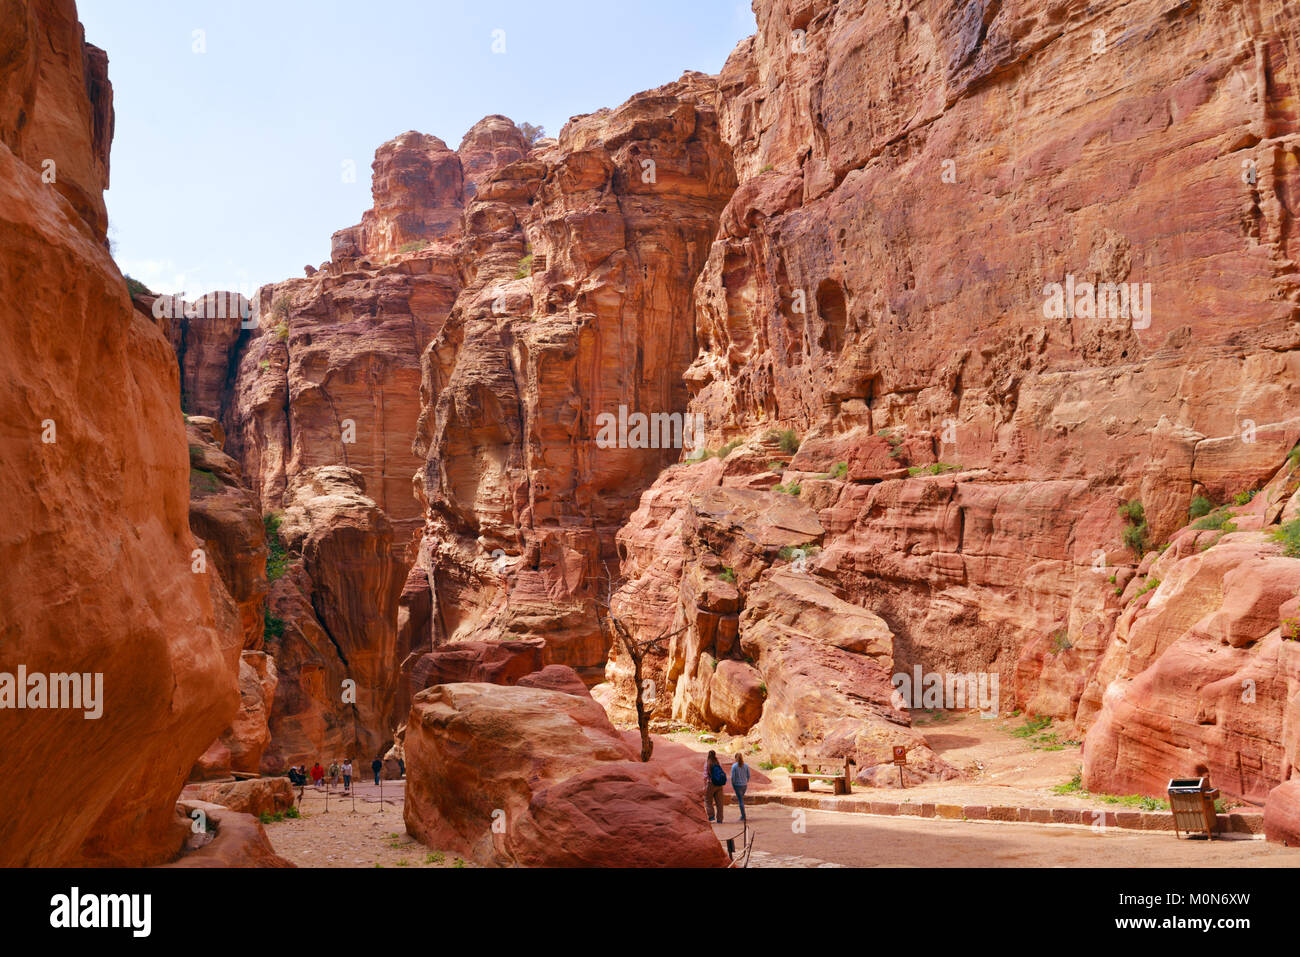 Petra, Jordan - March 15, 2014: Tourists walks in the Siq, the canyon of ancient Petra. Since 1985, Petra is listed as UNESCO World Heritage site Stock Photo